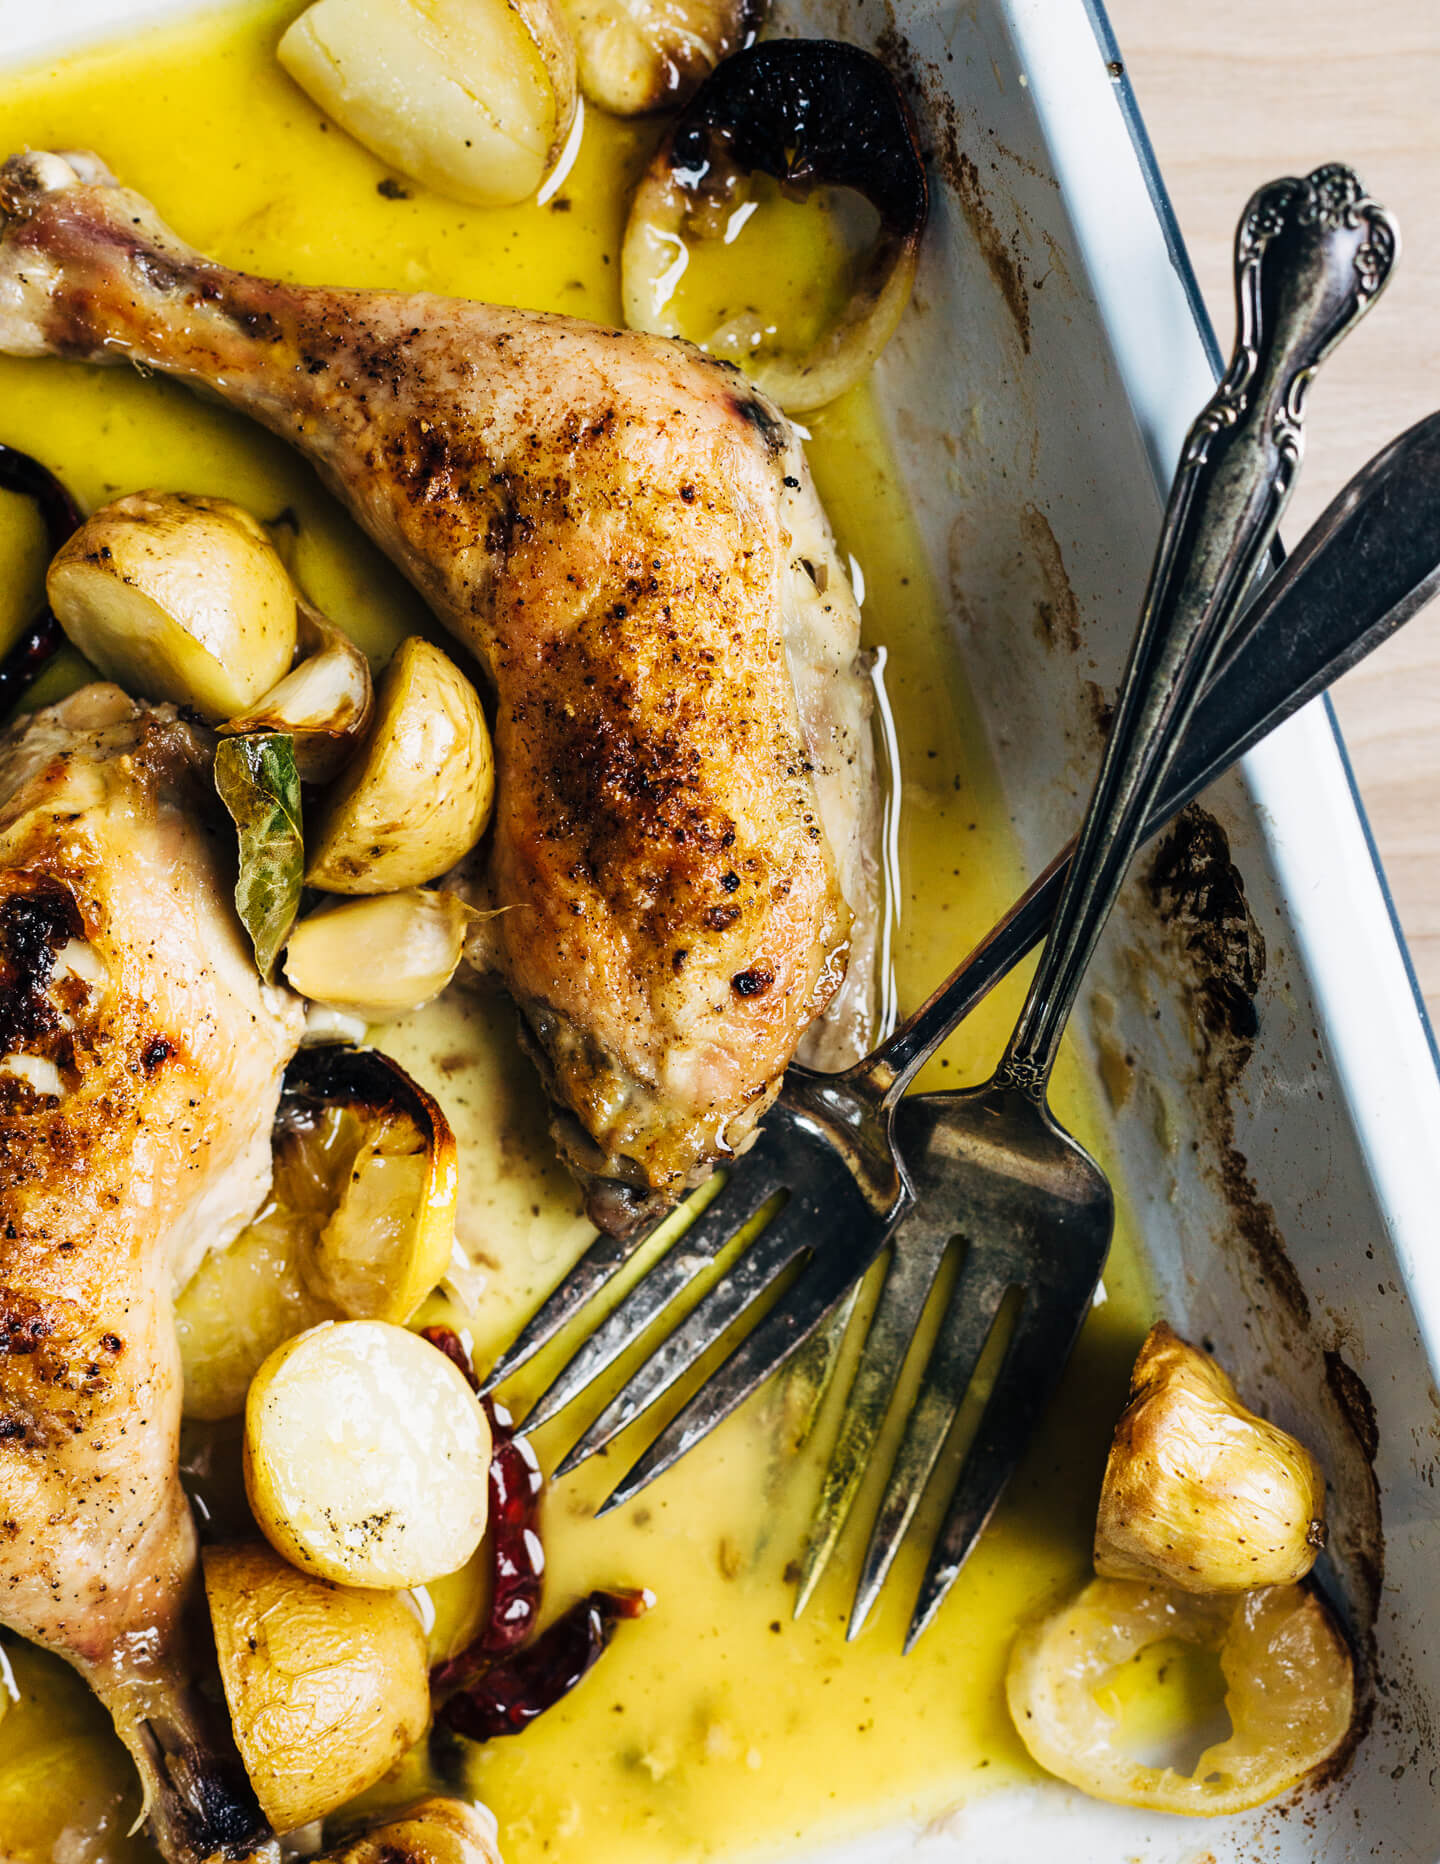 Slow-roasted whole chicken legs cooked in extra virgin olive oil. 